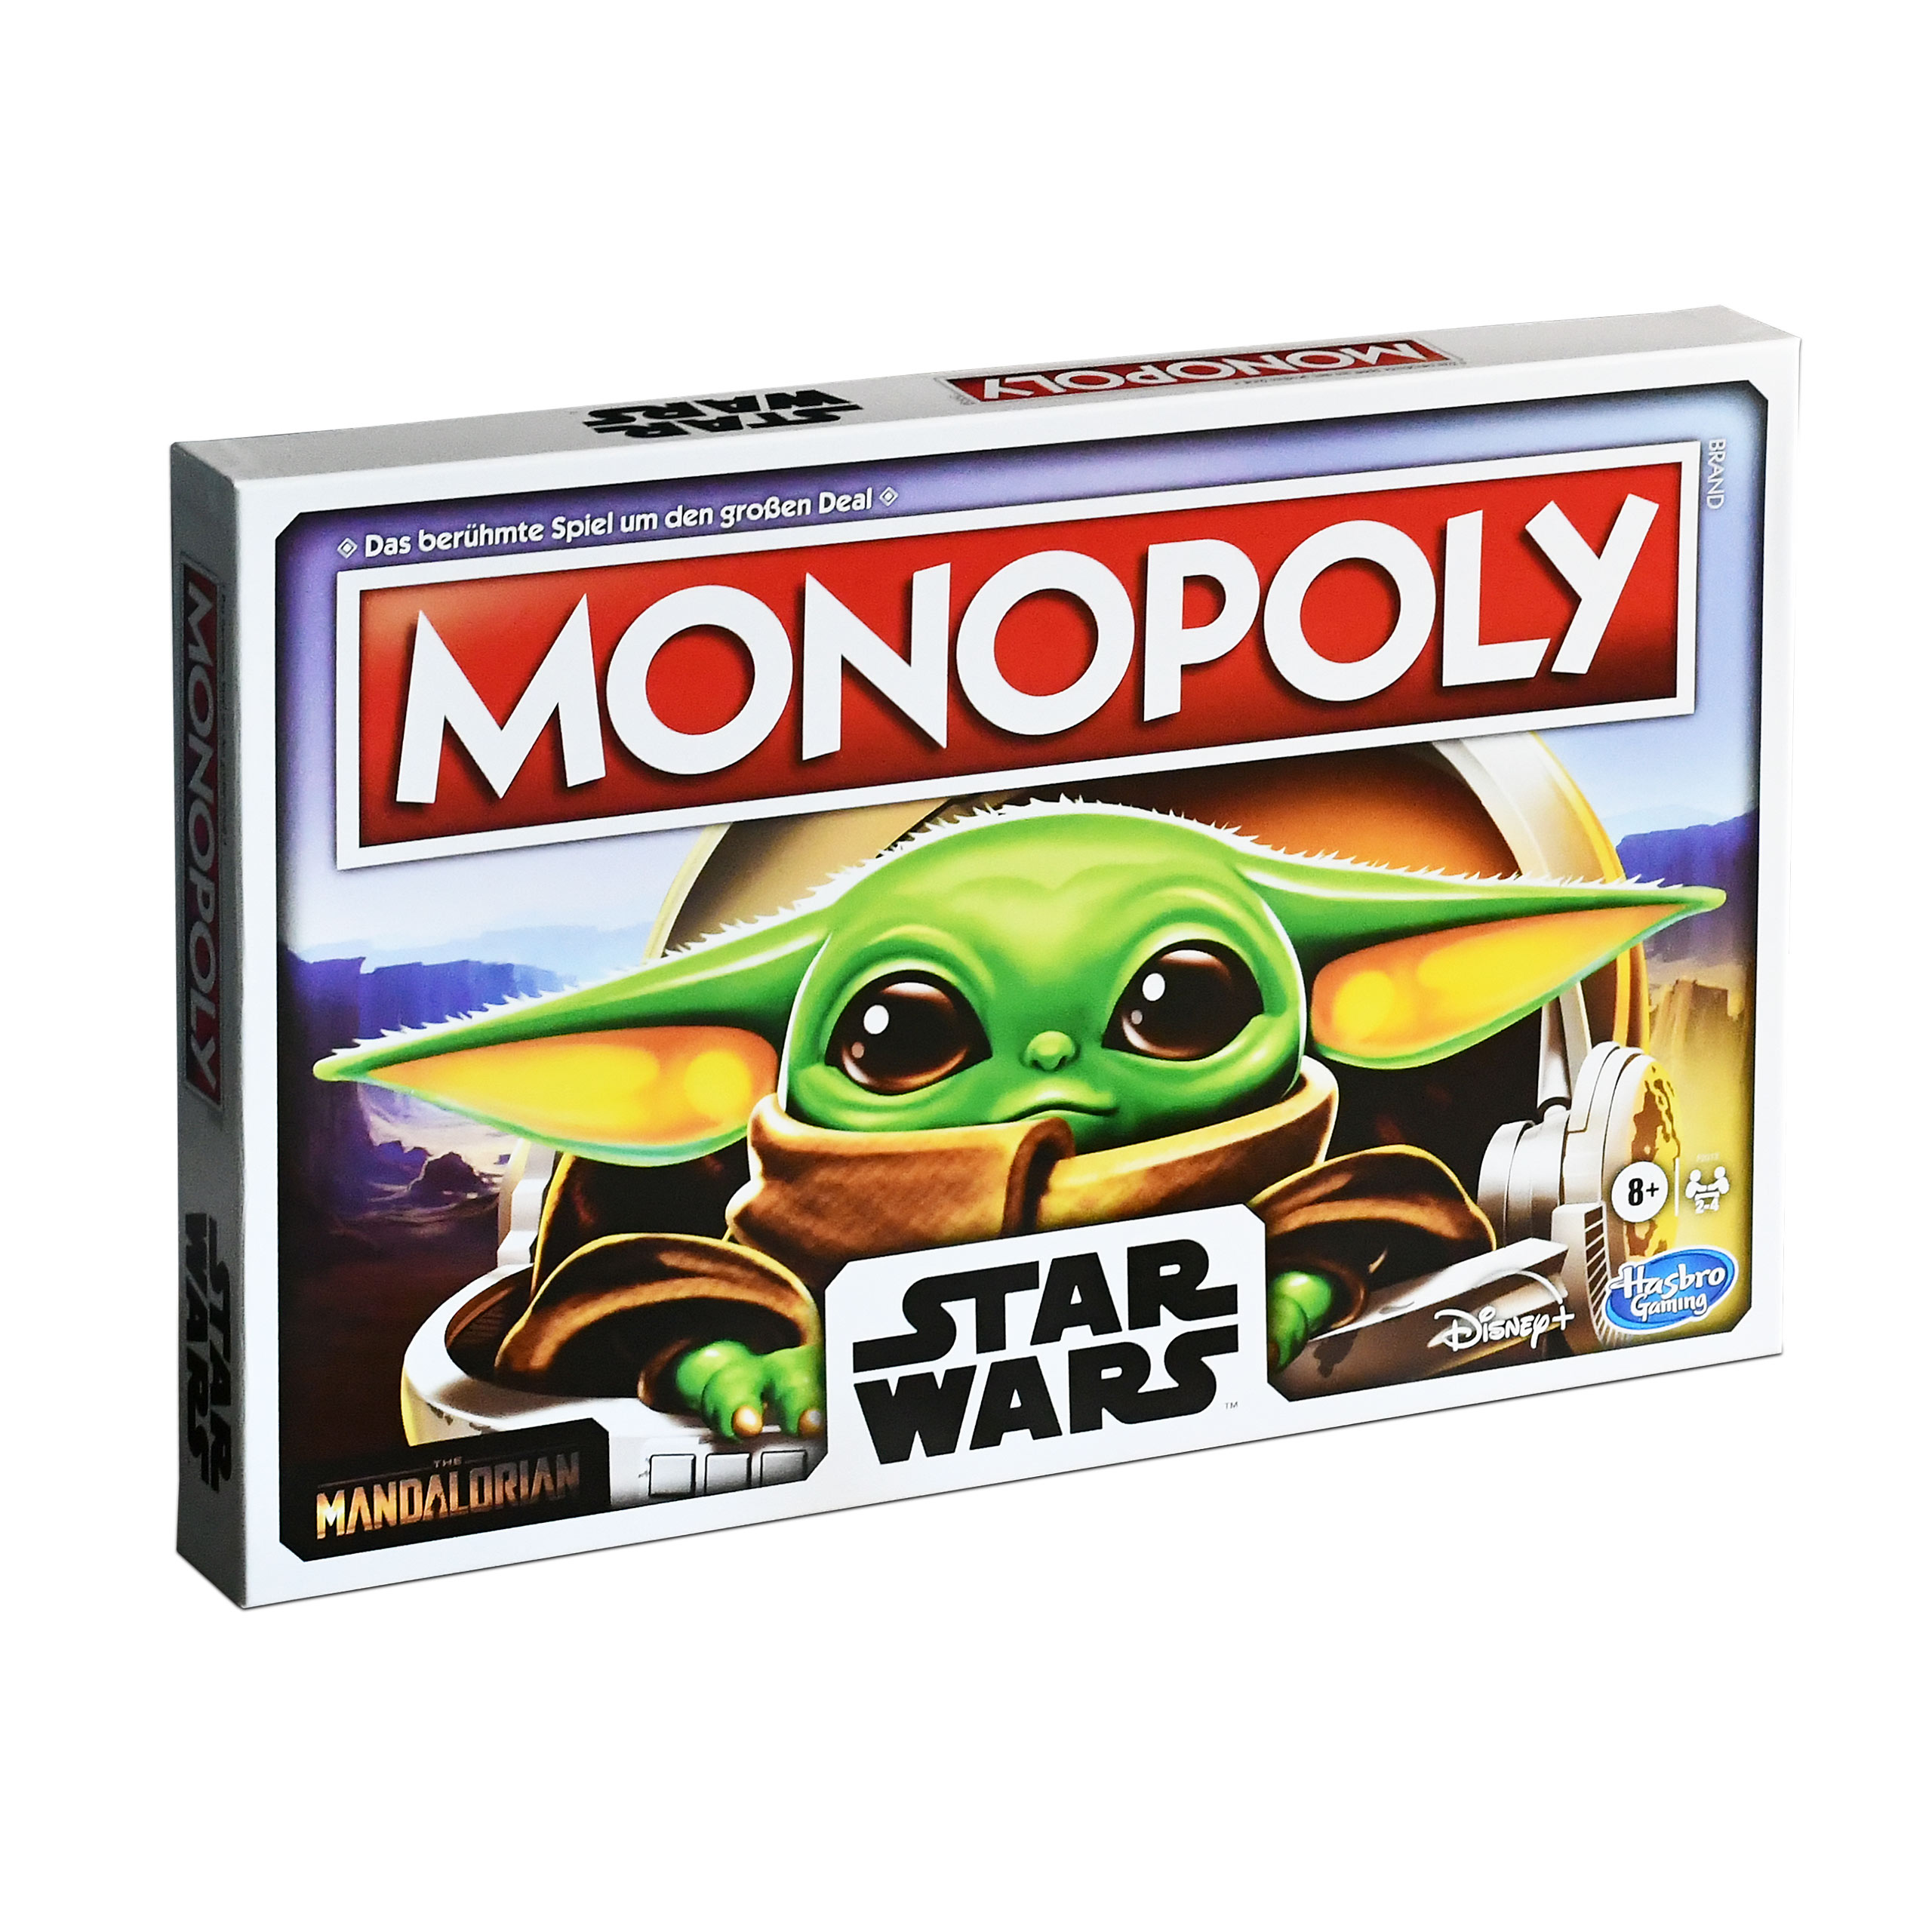 The Child Monopoly - Star Wars The Mandalorian